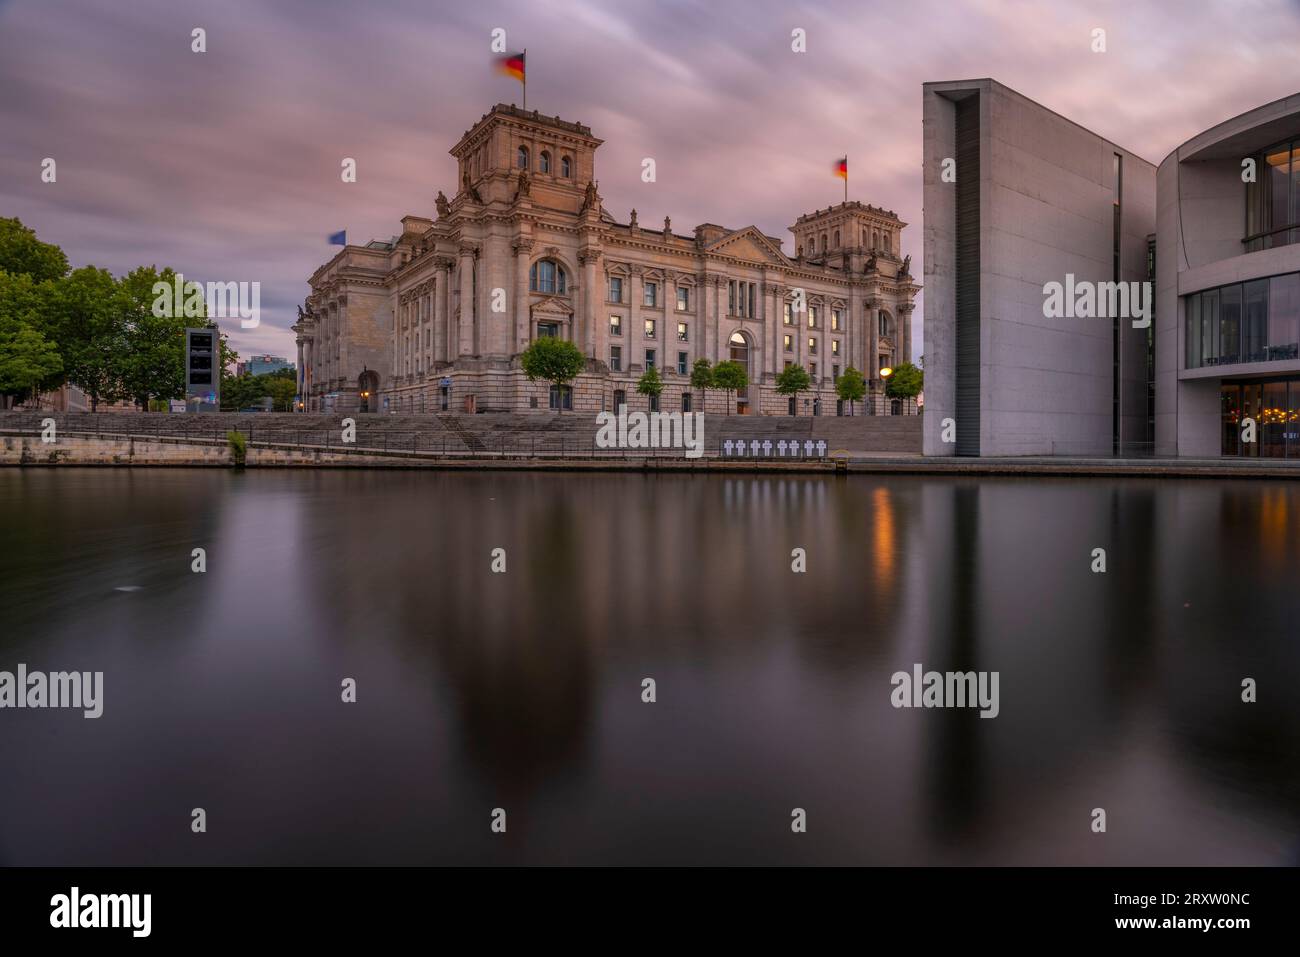 View of the River Spree and the Reichstag (German Parliament building) at sunset, Mitte, Berlin, Germany, Europe Stock Photo